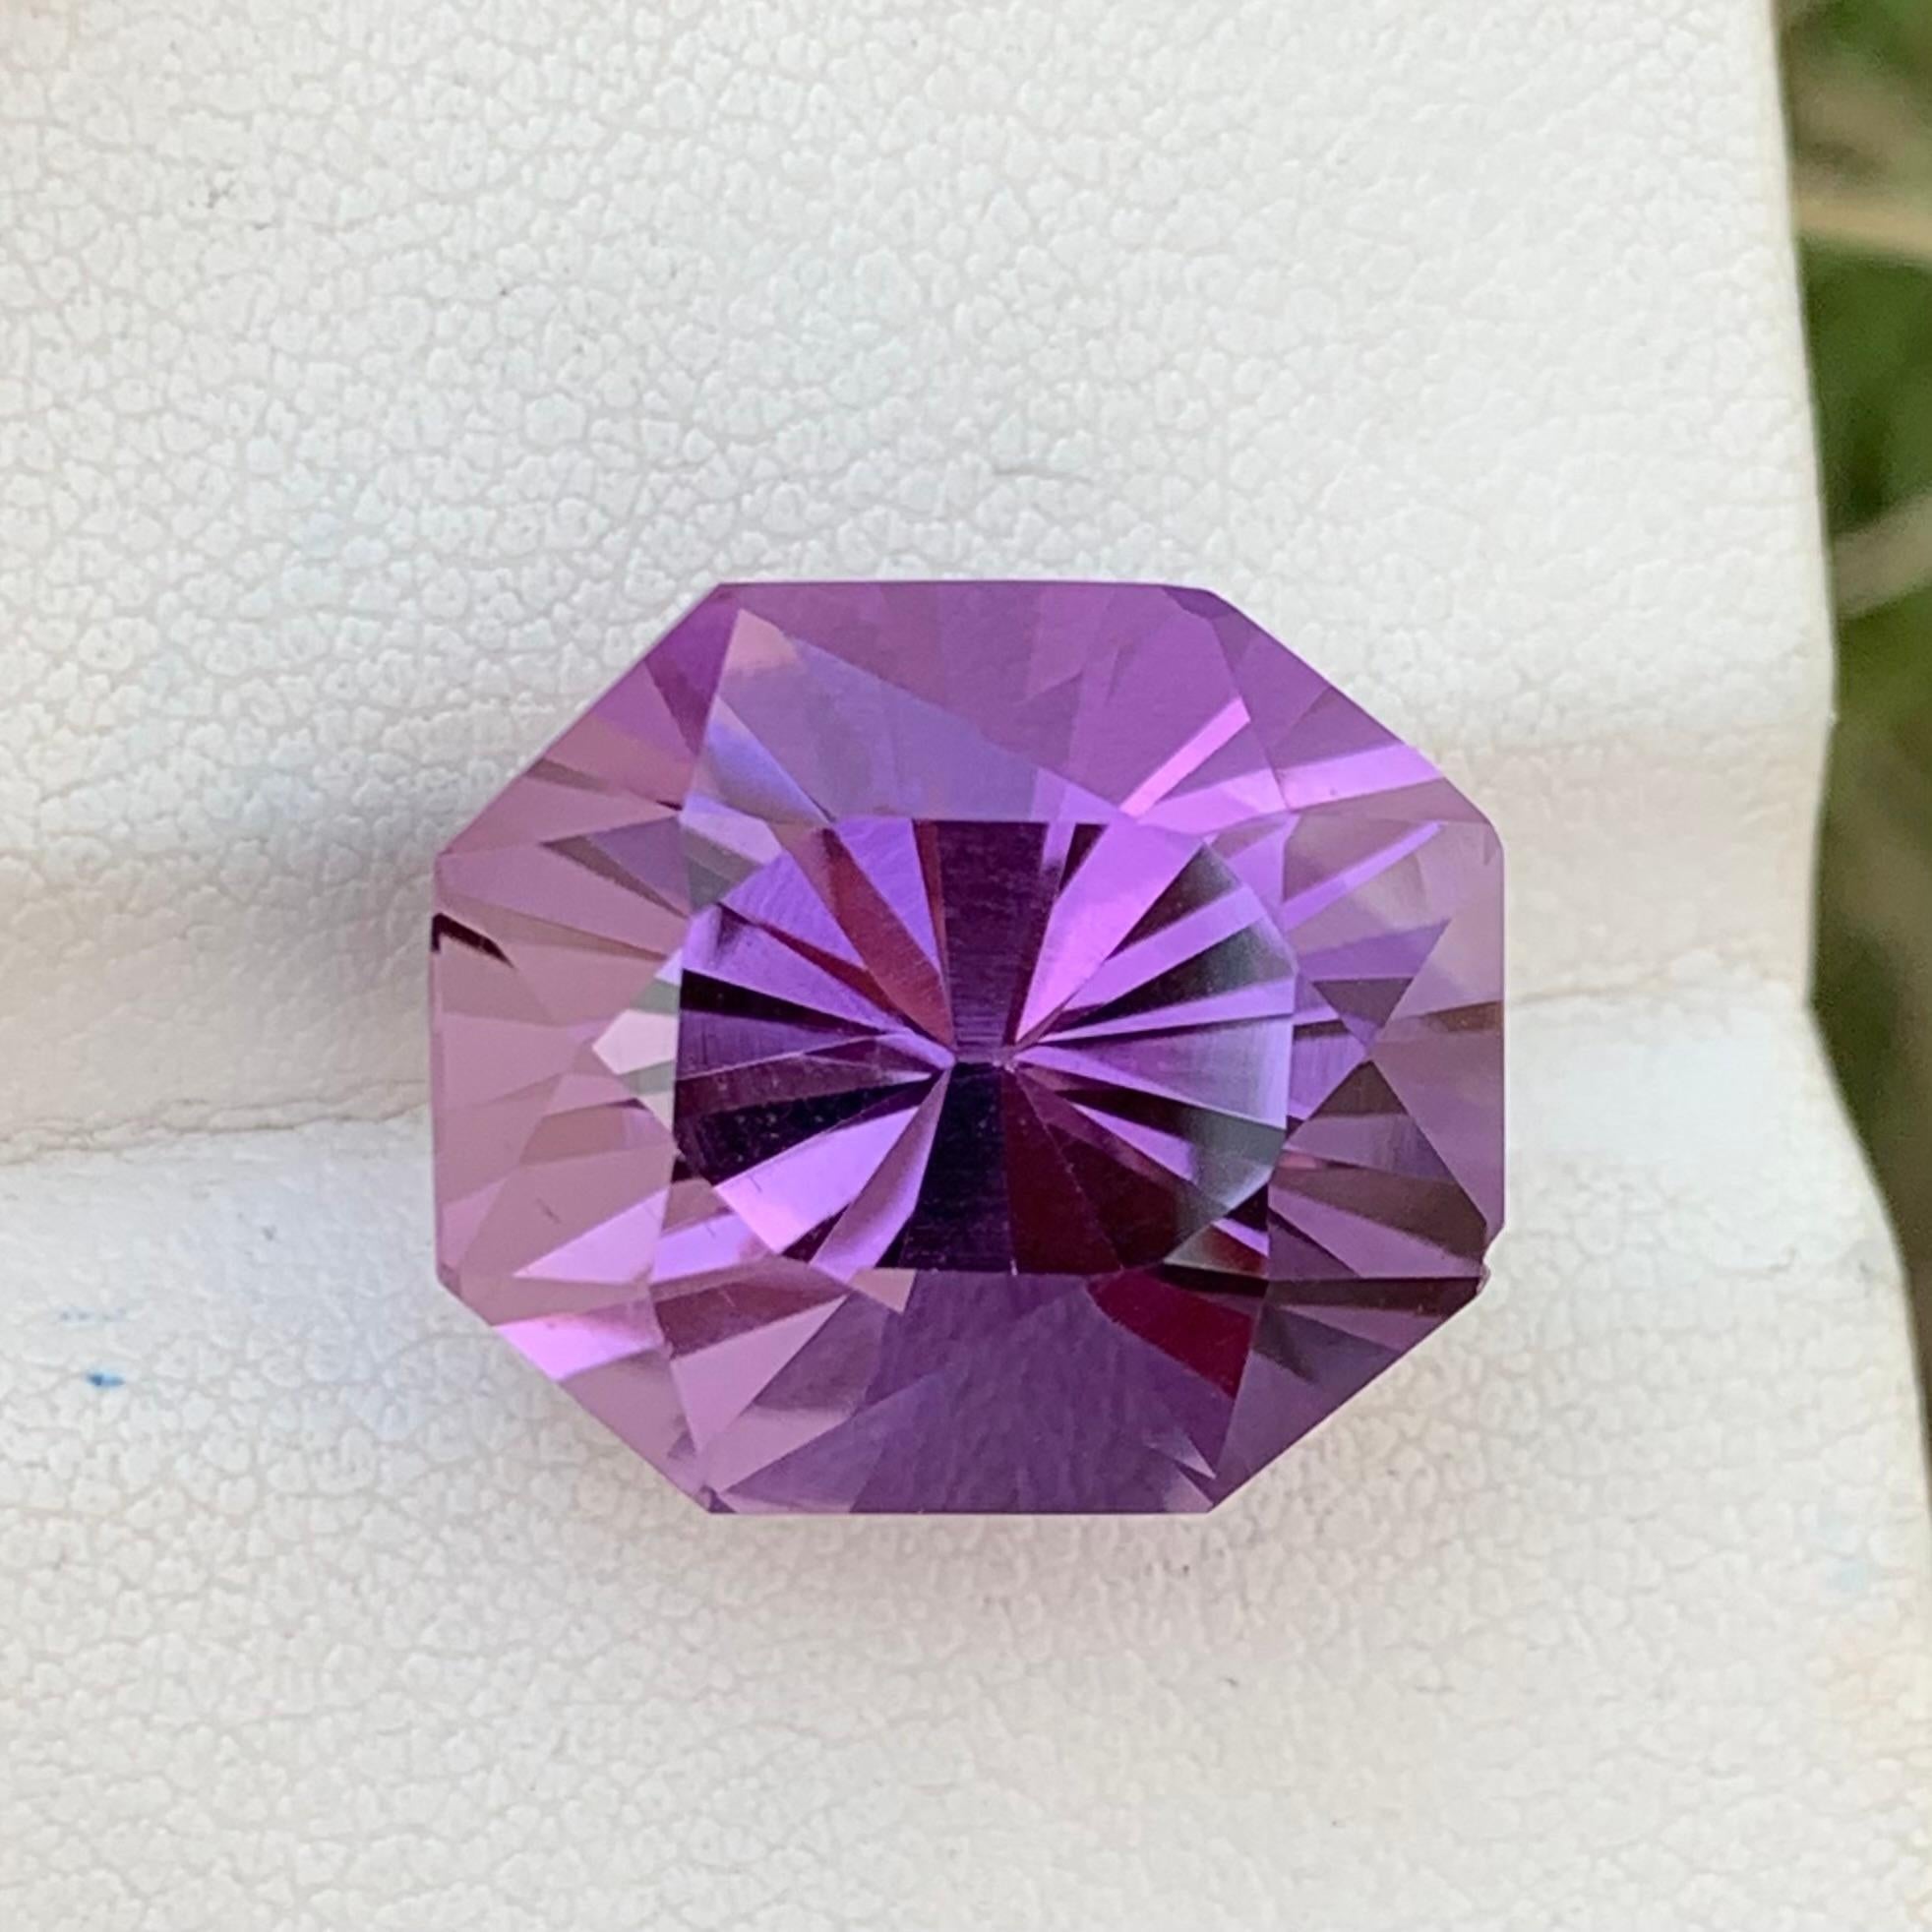 Loose Amethyst 
Weight: 17.85 Carats 
Dimension: 16.3x14.2x13.1 Mm
Origin: Brazil
Shape: Emerald 
Cut: Fancy
Color: Purple
Treatment: Non
Certificate: On Demand
Amethyst, a stunning variety of quartz, is cherished for its regal purple hues ranging